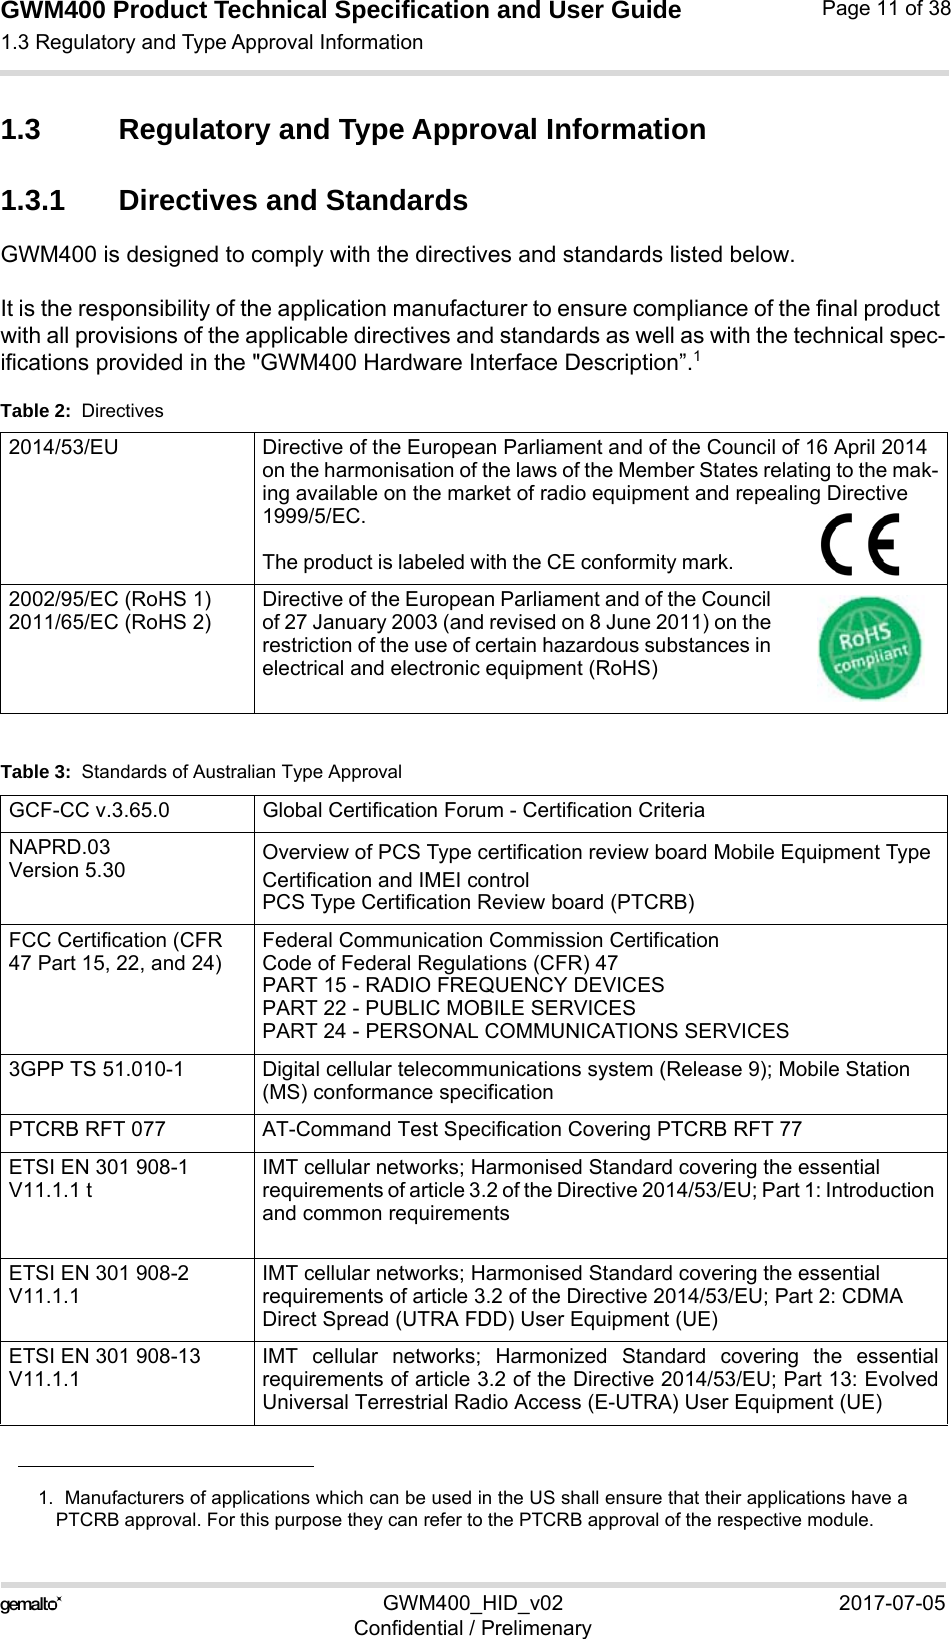 GWM400 Product Technical Specification and User Guide1.3 Regulatory and Type Approval Information15GWM400_HID_v02 2017-07-05Confidential / PrelimenaryPage 11 of 381.3 Regulatory and Type Approval Information1.3.1 Directives and StandardsGWM400 is designed to comply with the directives and standards listed below.It is the responsibility of the application manufacturer to ensure compliance of the final product with all provisions of the applicable directives and standards as well as with the technical spec-ifications provided in the &quot;GWM400 Hardware Interface Description”.1Table 3:  Standards of Australian Type Approval1.  Manufacturers of applications which can be used in the US shall ensure that their applications have aPTCRB approval. For this purpose they can refer to the PTCRB approval of the respective module. Table 2:  Directives2014/53/EU Directive of the European Parliament and of the Council of 16 April 2014 on the harmonisation of the laws of the Member States relating to the mak-ing available on the market of radio equipment and repealing Directive 1999/5/EC.The product is labeled with the CE conformity mark. 2002/95/EC (RoHS 1)2011/65/EC (RoHS 2)Directive of the European Parliament and of the Council of 27 January 2003 (and revised on 8 June 2011) on the restriction of the use of certain hazardous substances in electrical and electronic equipment (RoHS)GCF-CC v.3.65.0  Global Certification Forum - Certification CriteriaNAPRD.03 Version 5.30  Overview of PCS Type certification review board Mobile Equipment TypeCertification and IMEI controlPCS Type Certification Review board (PTCRB)FCC Certification (CFR 47 Part 15, 22, and 24) Federal Communication Commission Certification Code of Federal Regulations (CFR) 47 PART 15 - RADIO FREQUENCY DEVICESPART 22 - PUBLIC MOBILE SERVICESPART 24 - PERSONAL COMMUNICATIONS SERVICES3GPP TS 51.010-1 Digital cellular telecommunications system (Release 9); Mobile Station (MS) conformance specificationPTCRB RFT 077 AT-Command Test Specification Covering PTCRB RFT 77ETSI EN 301 908-1 V11.1.1 tIMT cellular networks; Harmonised Standard covering the essential requirements of article 3.2 of the Directive 2014/53/EU; Part 1: Introduction and common requirementsETSI EN 301 908-2 V11.1.1IMT cellular networks; Harmonised Standard covering the essential requirements of article 3.2 of the Directive 2014/53/EU; Part 2: CDMA Direct Spread (UTRA FDD) User Equipment (UE)ETSI EN 301 908-13V11.1.1IMT cellular networks; Harmonized Standard covering the essentialrequirements of article 3.2 of the Directive 2014/53/EU; Part 13: EvolvedUniversal Terrestrial Radio Access (E-UTRA) User Equipment (UE)